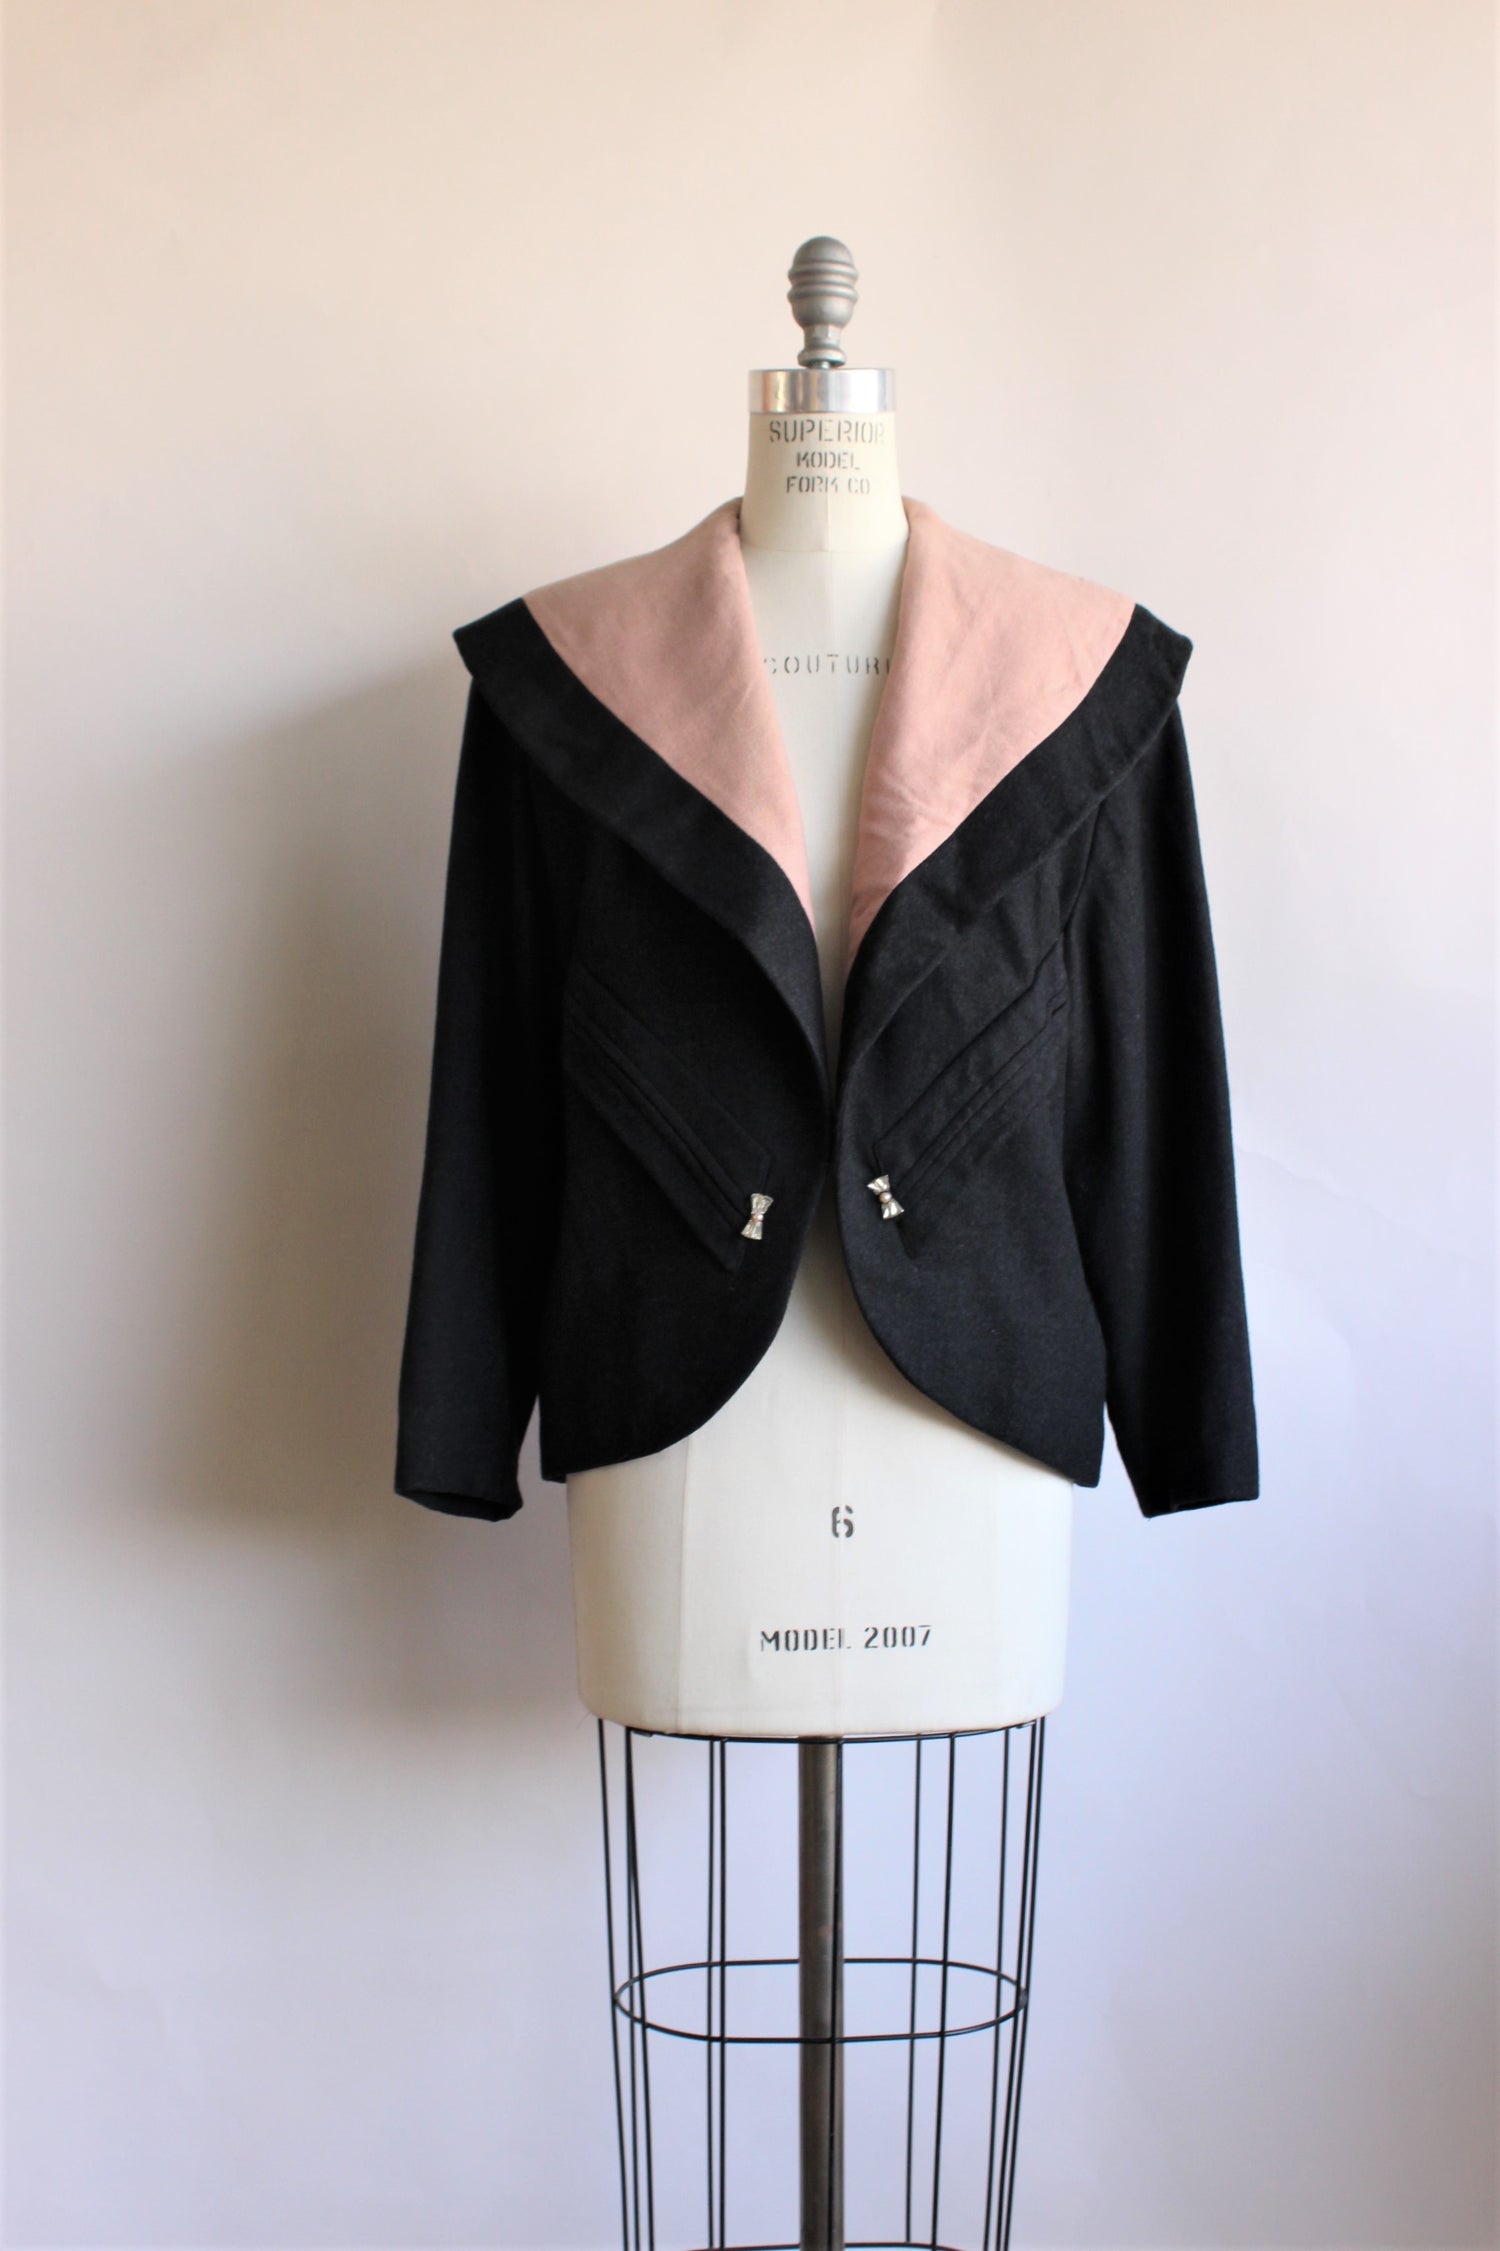 VIntage 1950s Darkest Gray Wool Jacket With Pink Lining By Buddy Bates